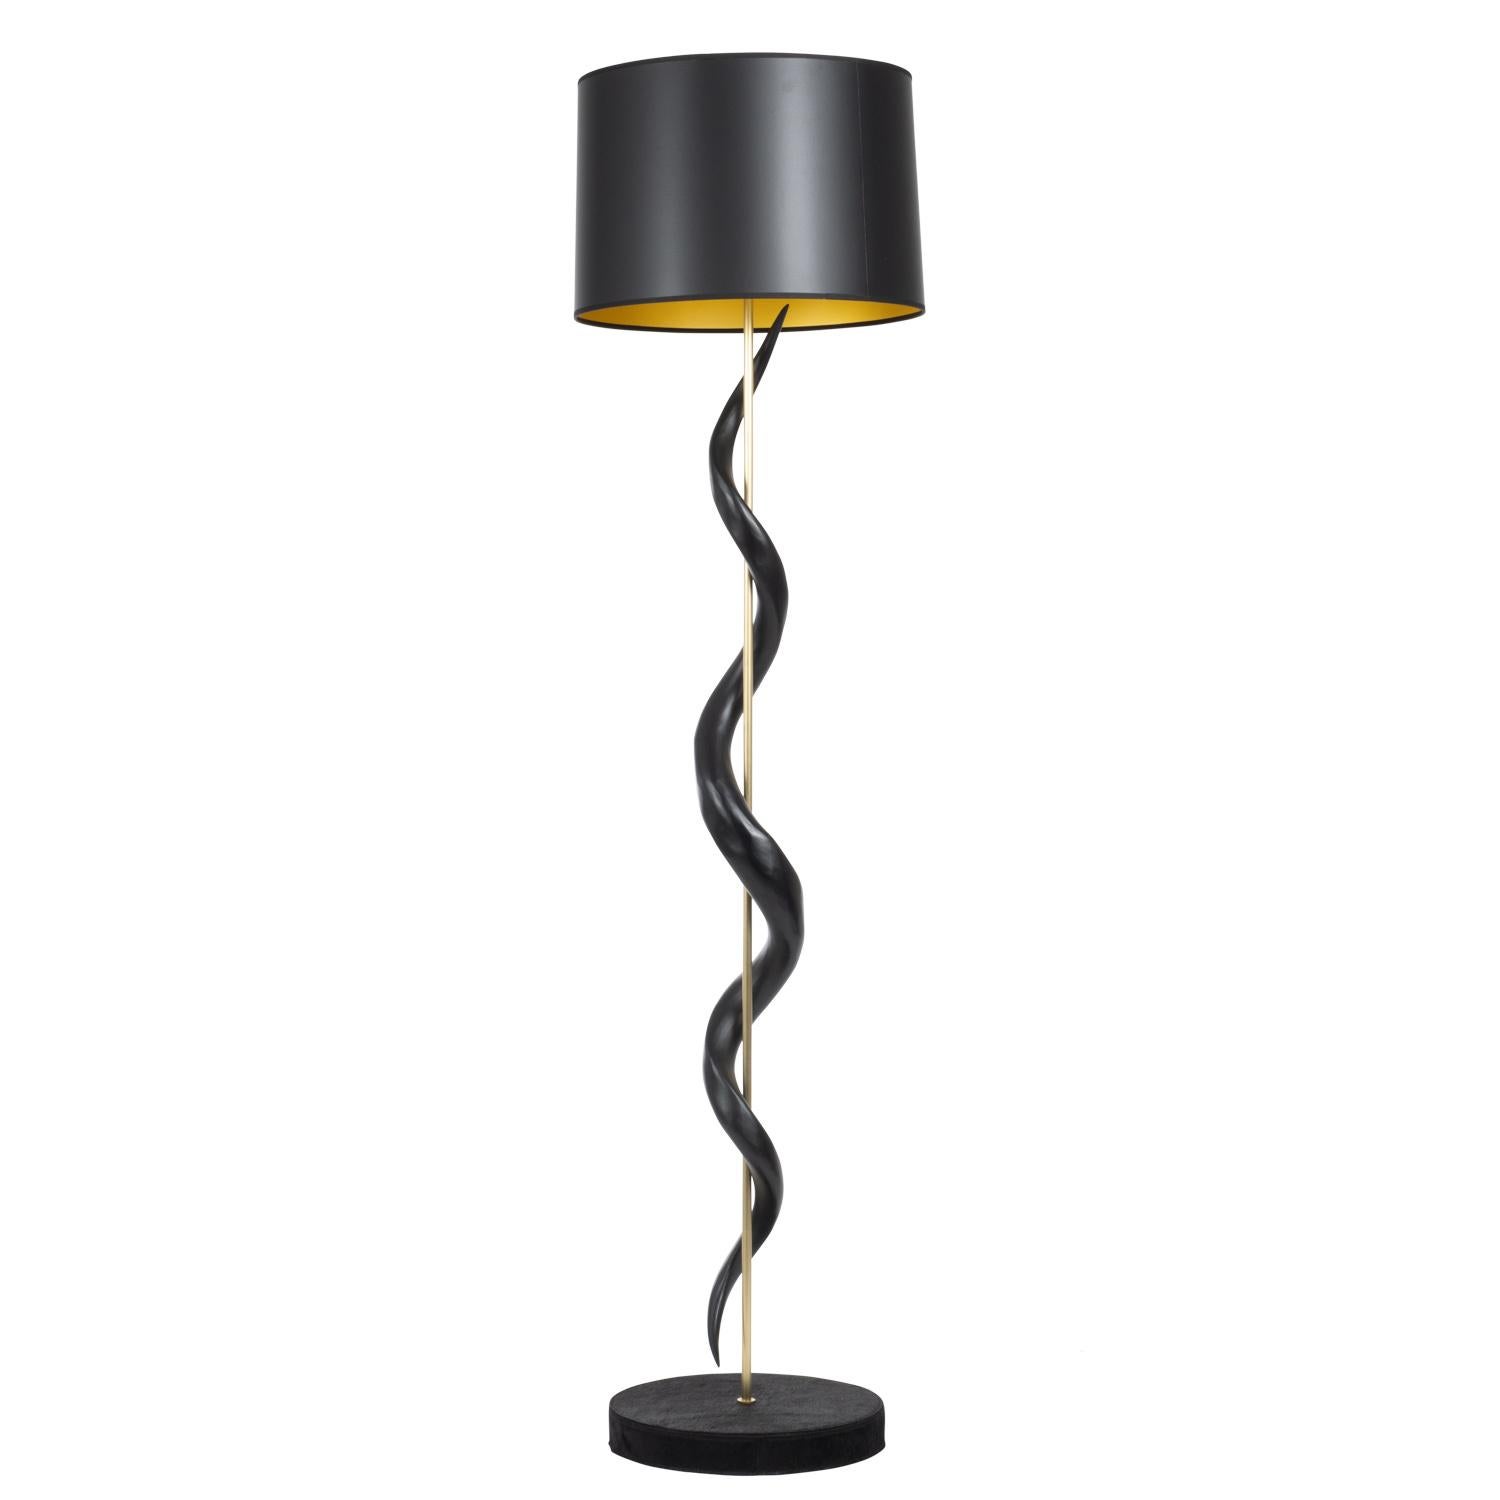 Handcrafted in South Africa, this naturally elegant floor lamp features two inverse African kudu horns encirling a brass rod above a round wooden base, which is wrapped in top-stitched dyed black cow hide. All hide and horn has been sustainably